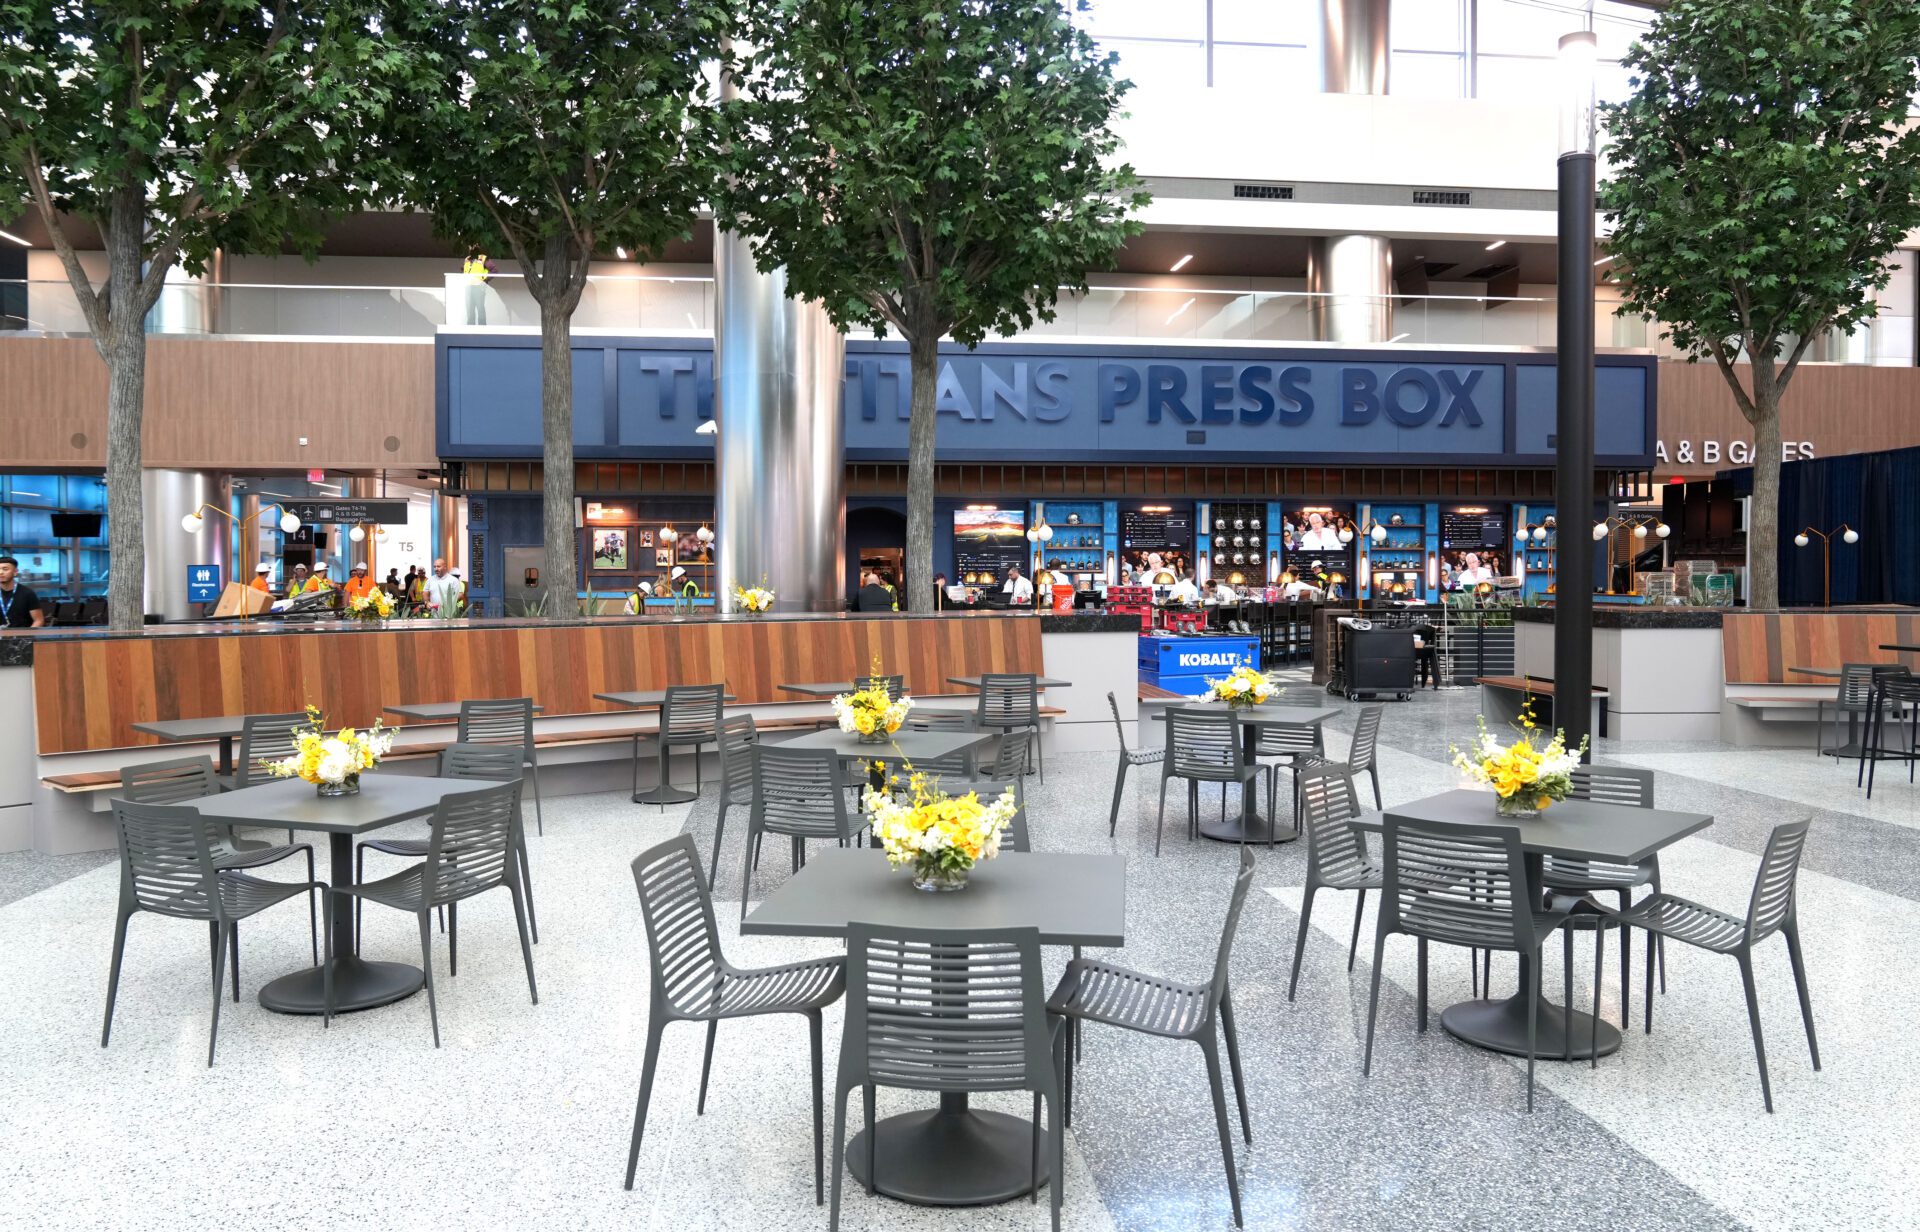 Nashville Airport opens new shops and first duty-free duty-paid store